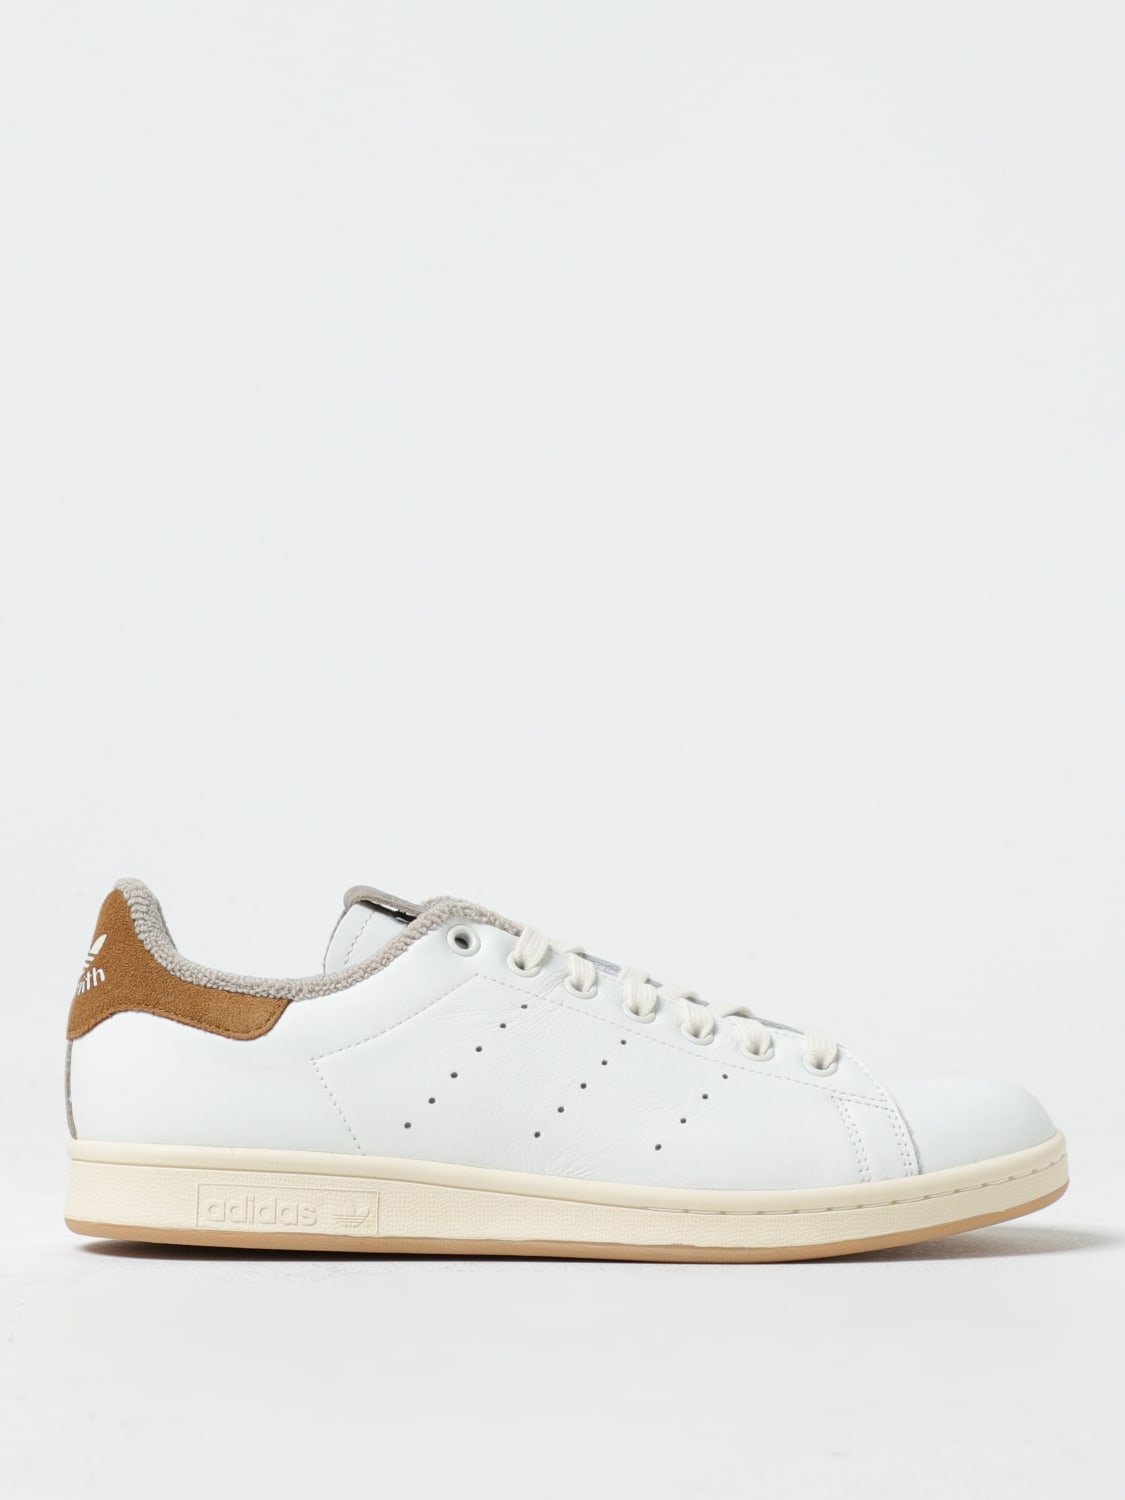 ADIDAS ORIGINALS: Stan Smith sneakers Adidas sneakers online | White ID2031 leather Originals at - in